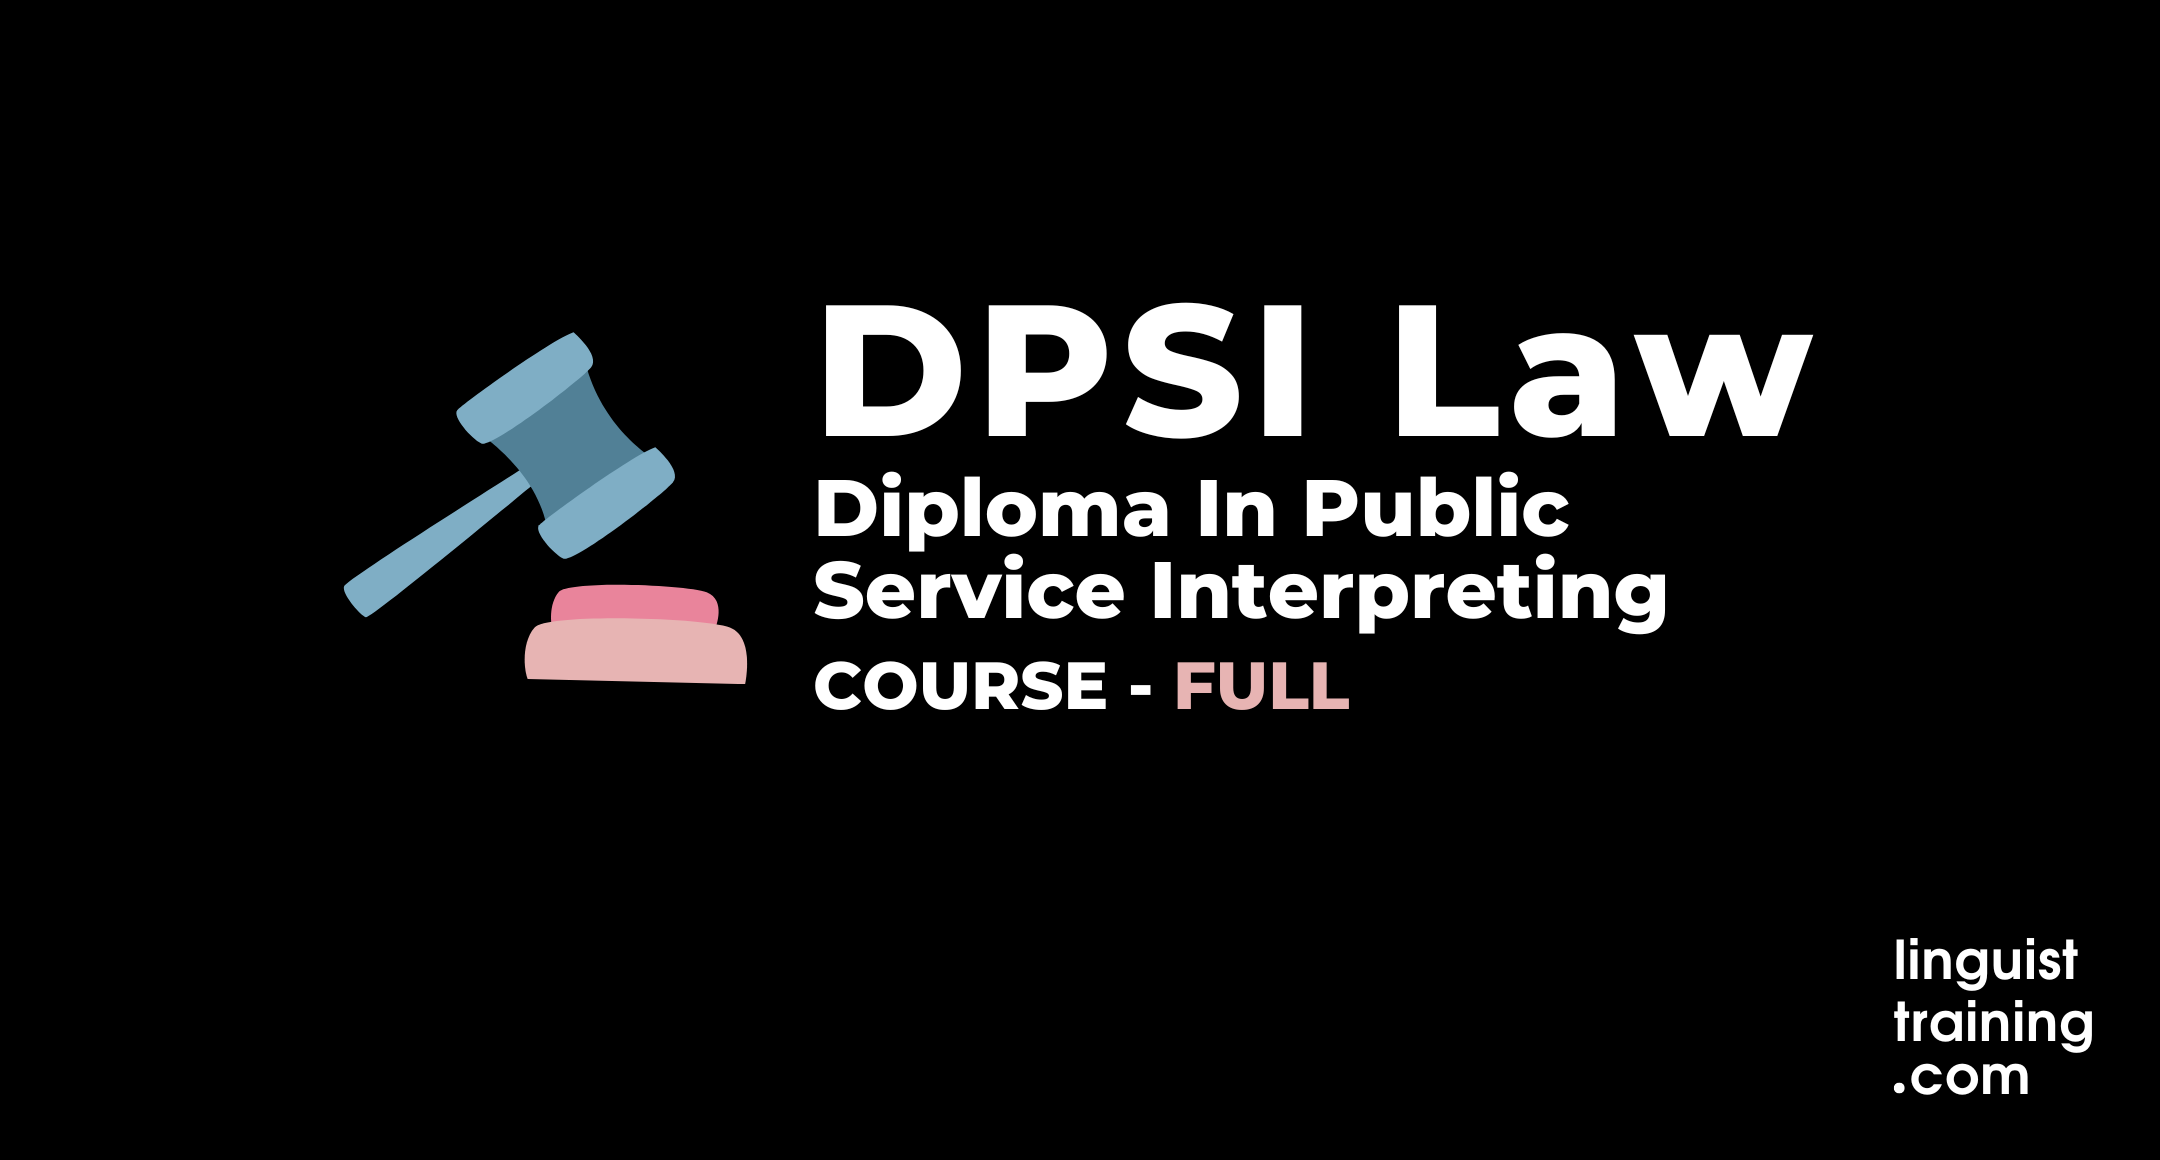 DPSI Law FULL COURSE